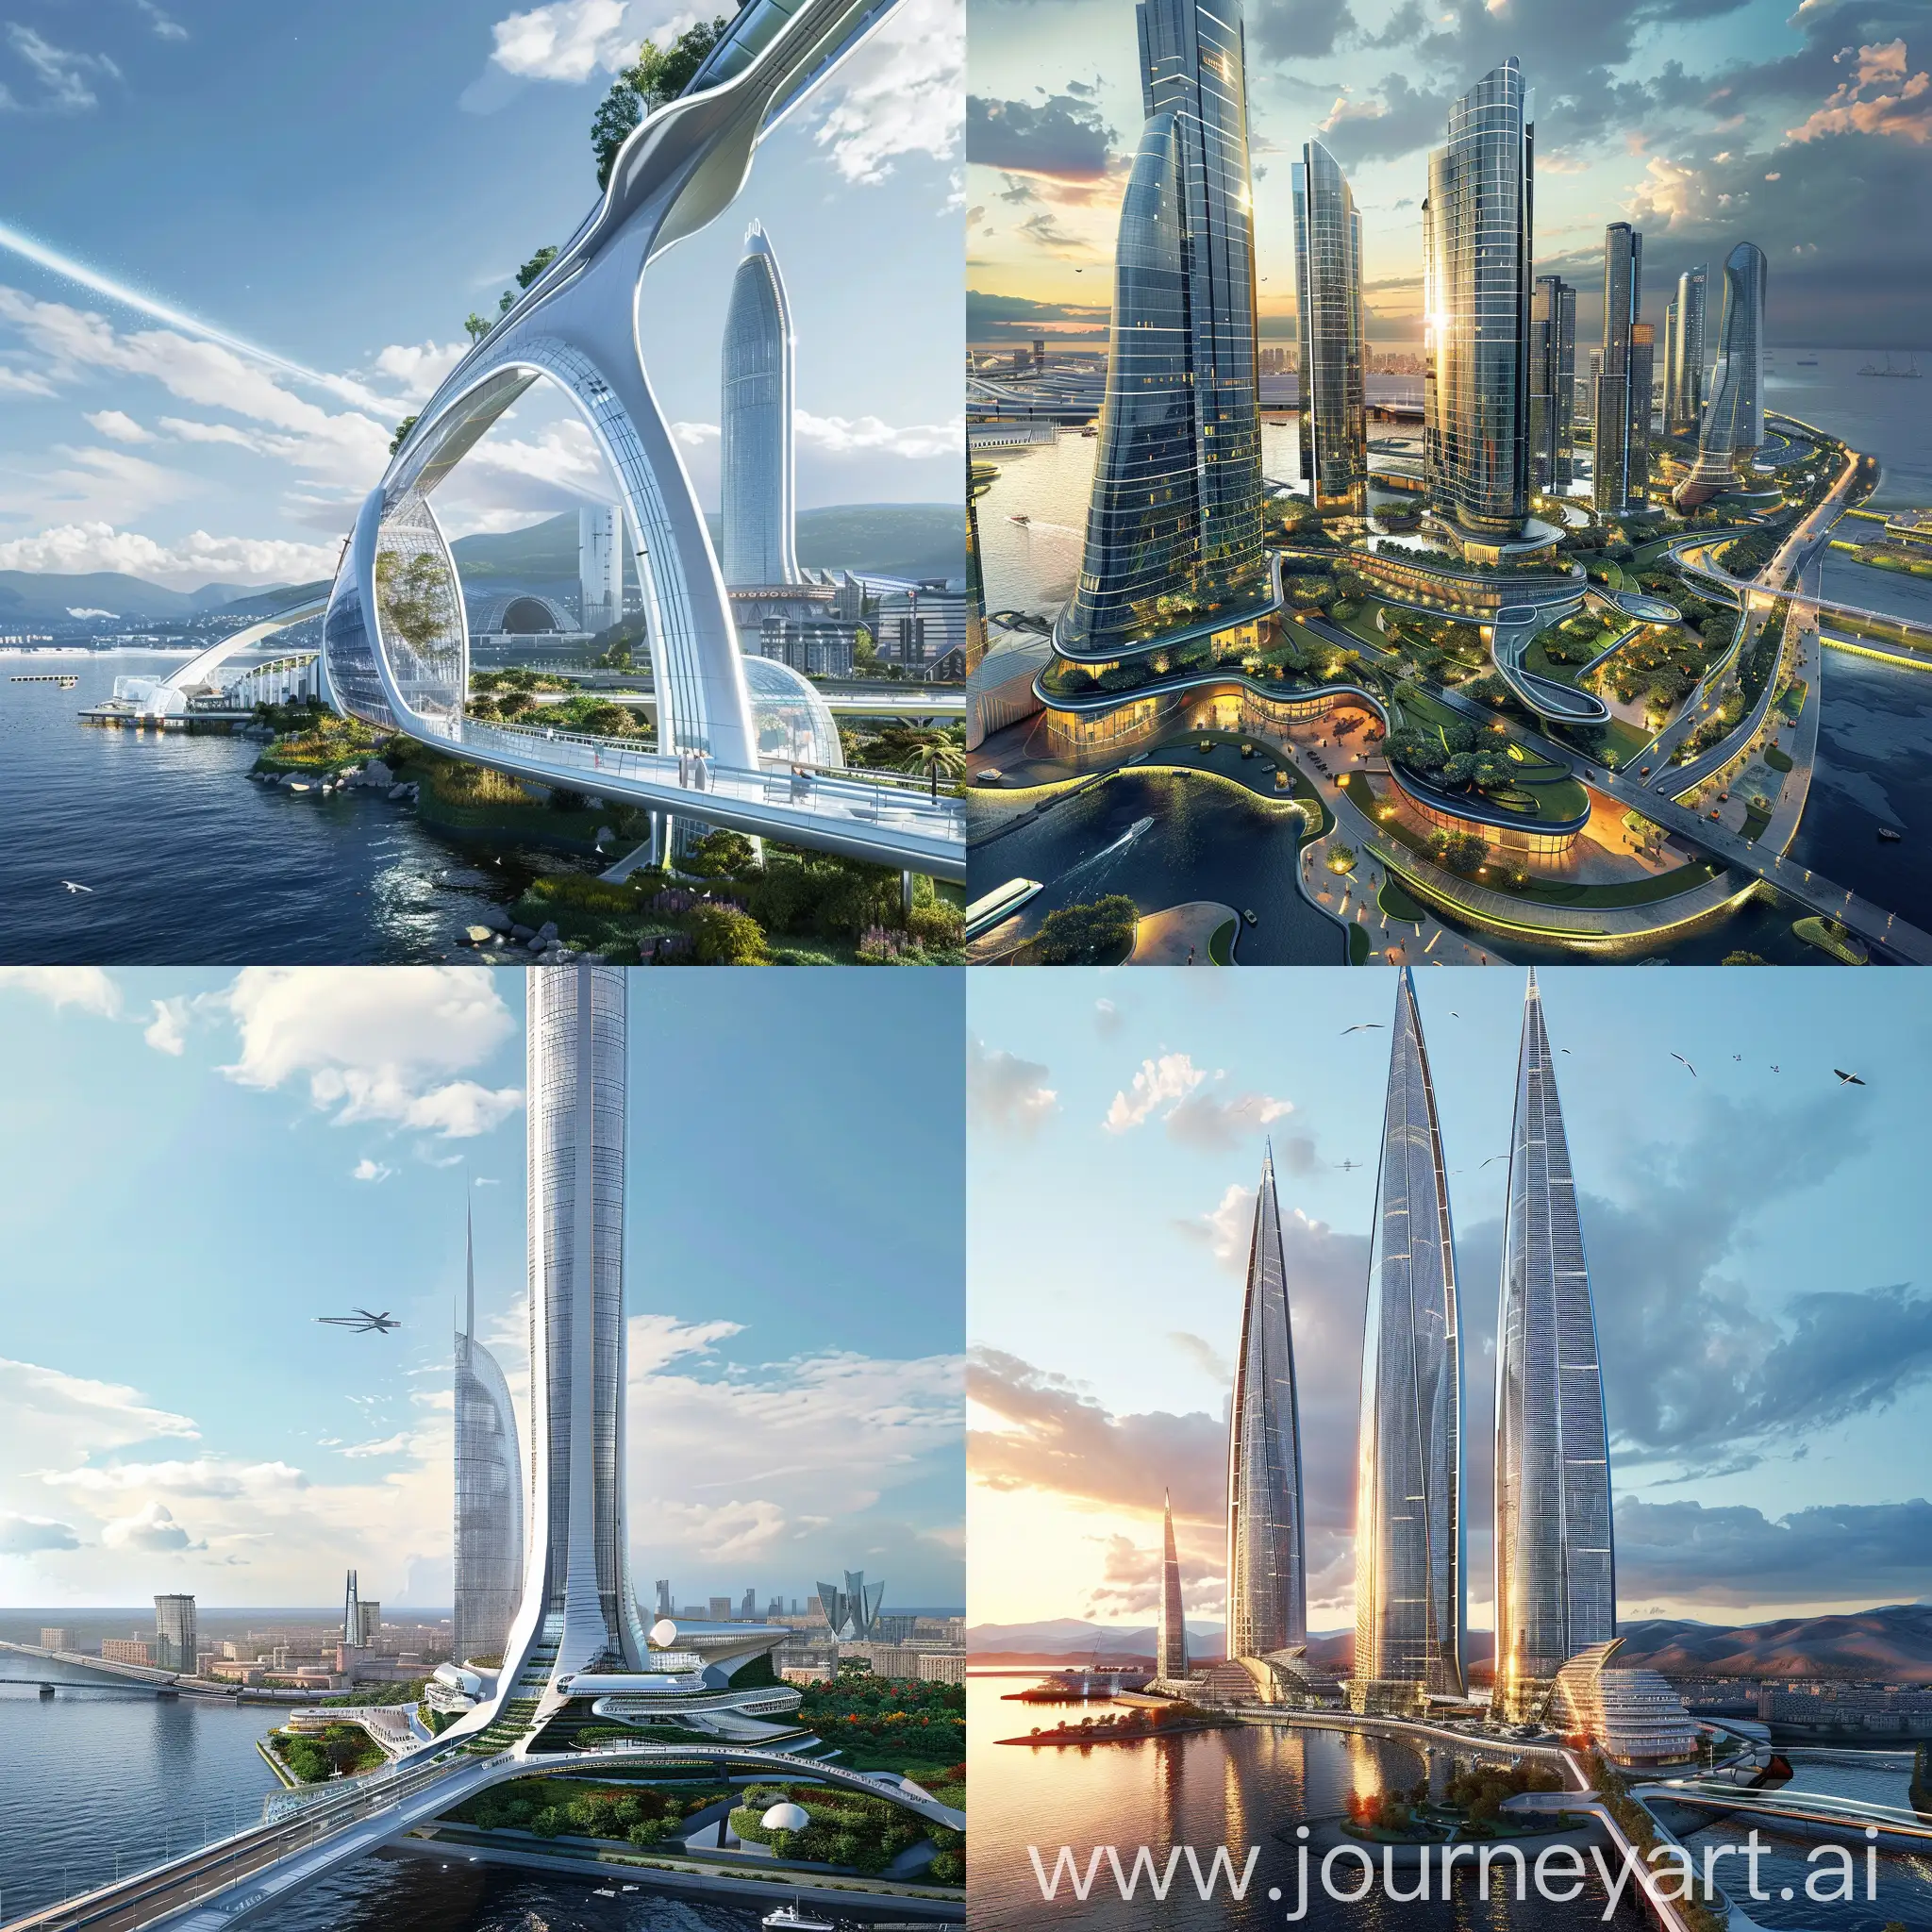 Futuristic Vladivostok, Kinetic Facades, Vertical Gardens, Underwater Metro System, Interactive Public Spaces, Smart Homes with Biometric Access, Sustainable Energy Infrastructure, 3D Printing Infrastructure, Augmented Reality Overlays, Underground Greenhouses, Community Skyways and Pods, Megascrapers with Integrated Landing Pads, Self-Sustaining Eco-Districts, Glass and Steel Bridges with Kinetic Elements, Underwater City Expansion, Hyperloop Transportation Lines, Orbital Solar Power Stations, Weather-Regulation Technology, Spaceport and Launch Facilities, Kinetic Public Art Installations, Living Roofs and Biomimicry Architecture, in unreal engine 5 style --stylize 1000